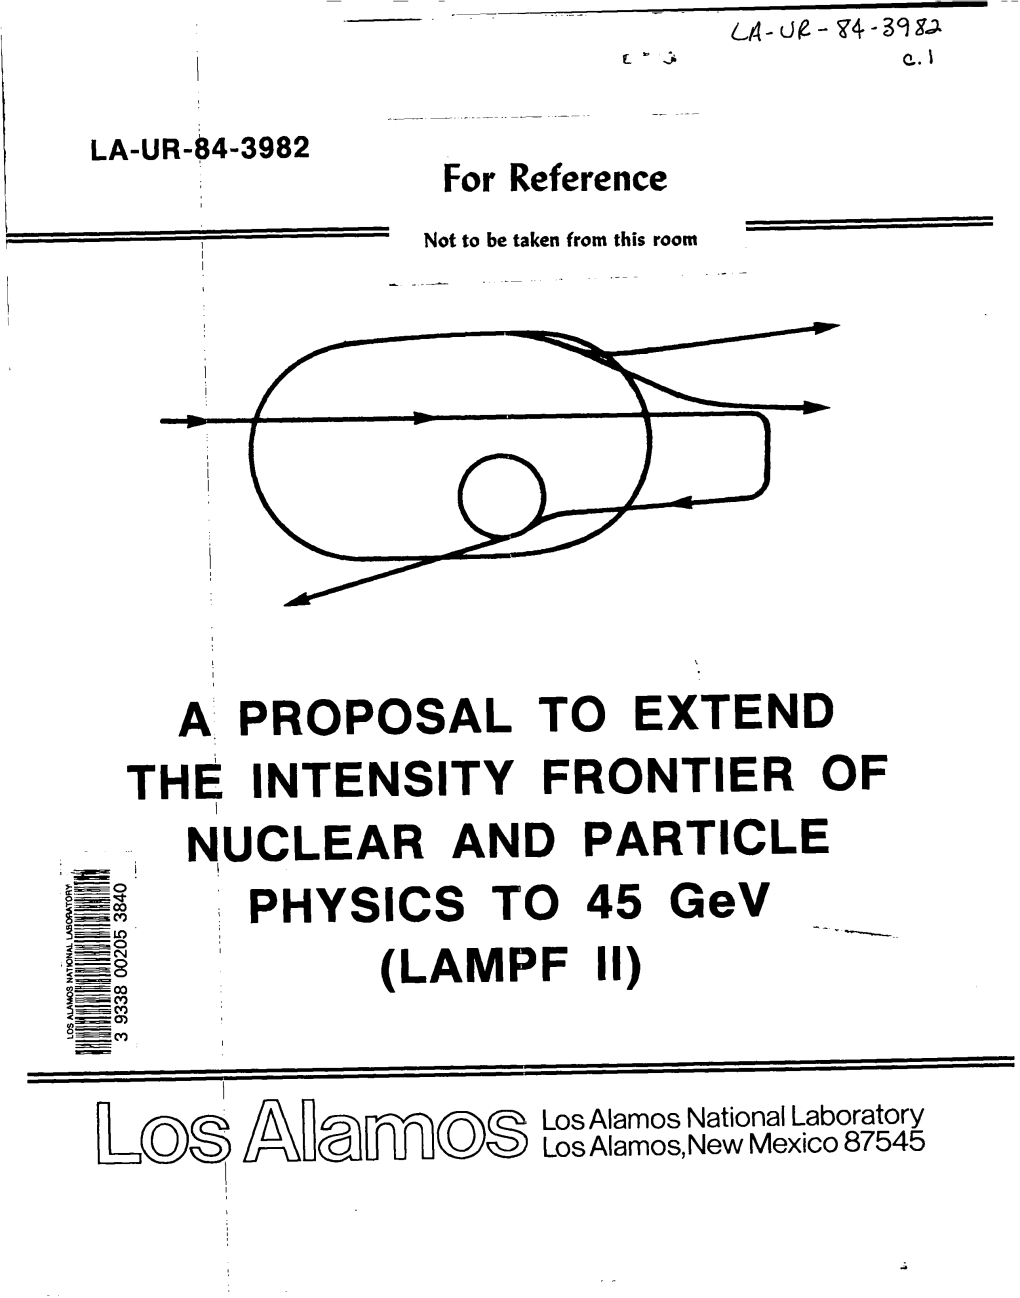 A the Proposal to Extend Intensity Frontier of N,Uclear and Particle